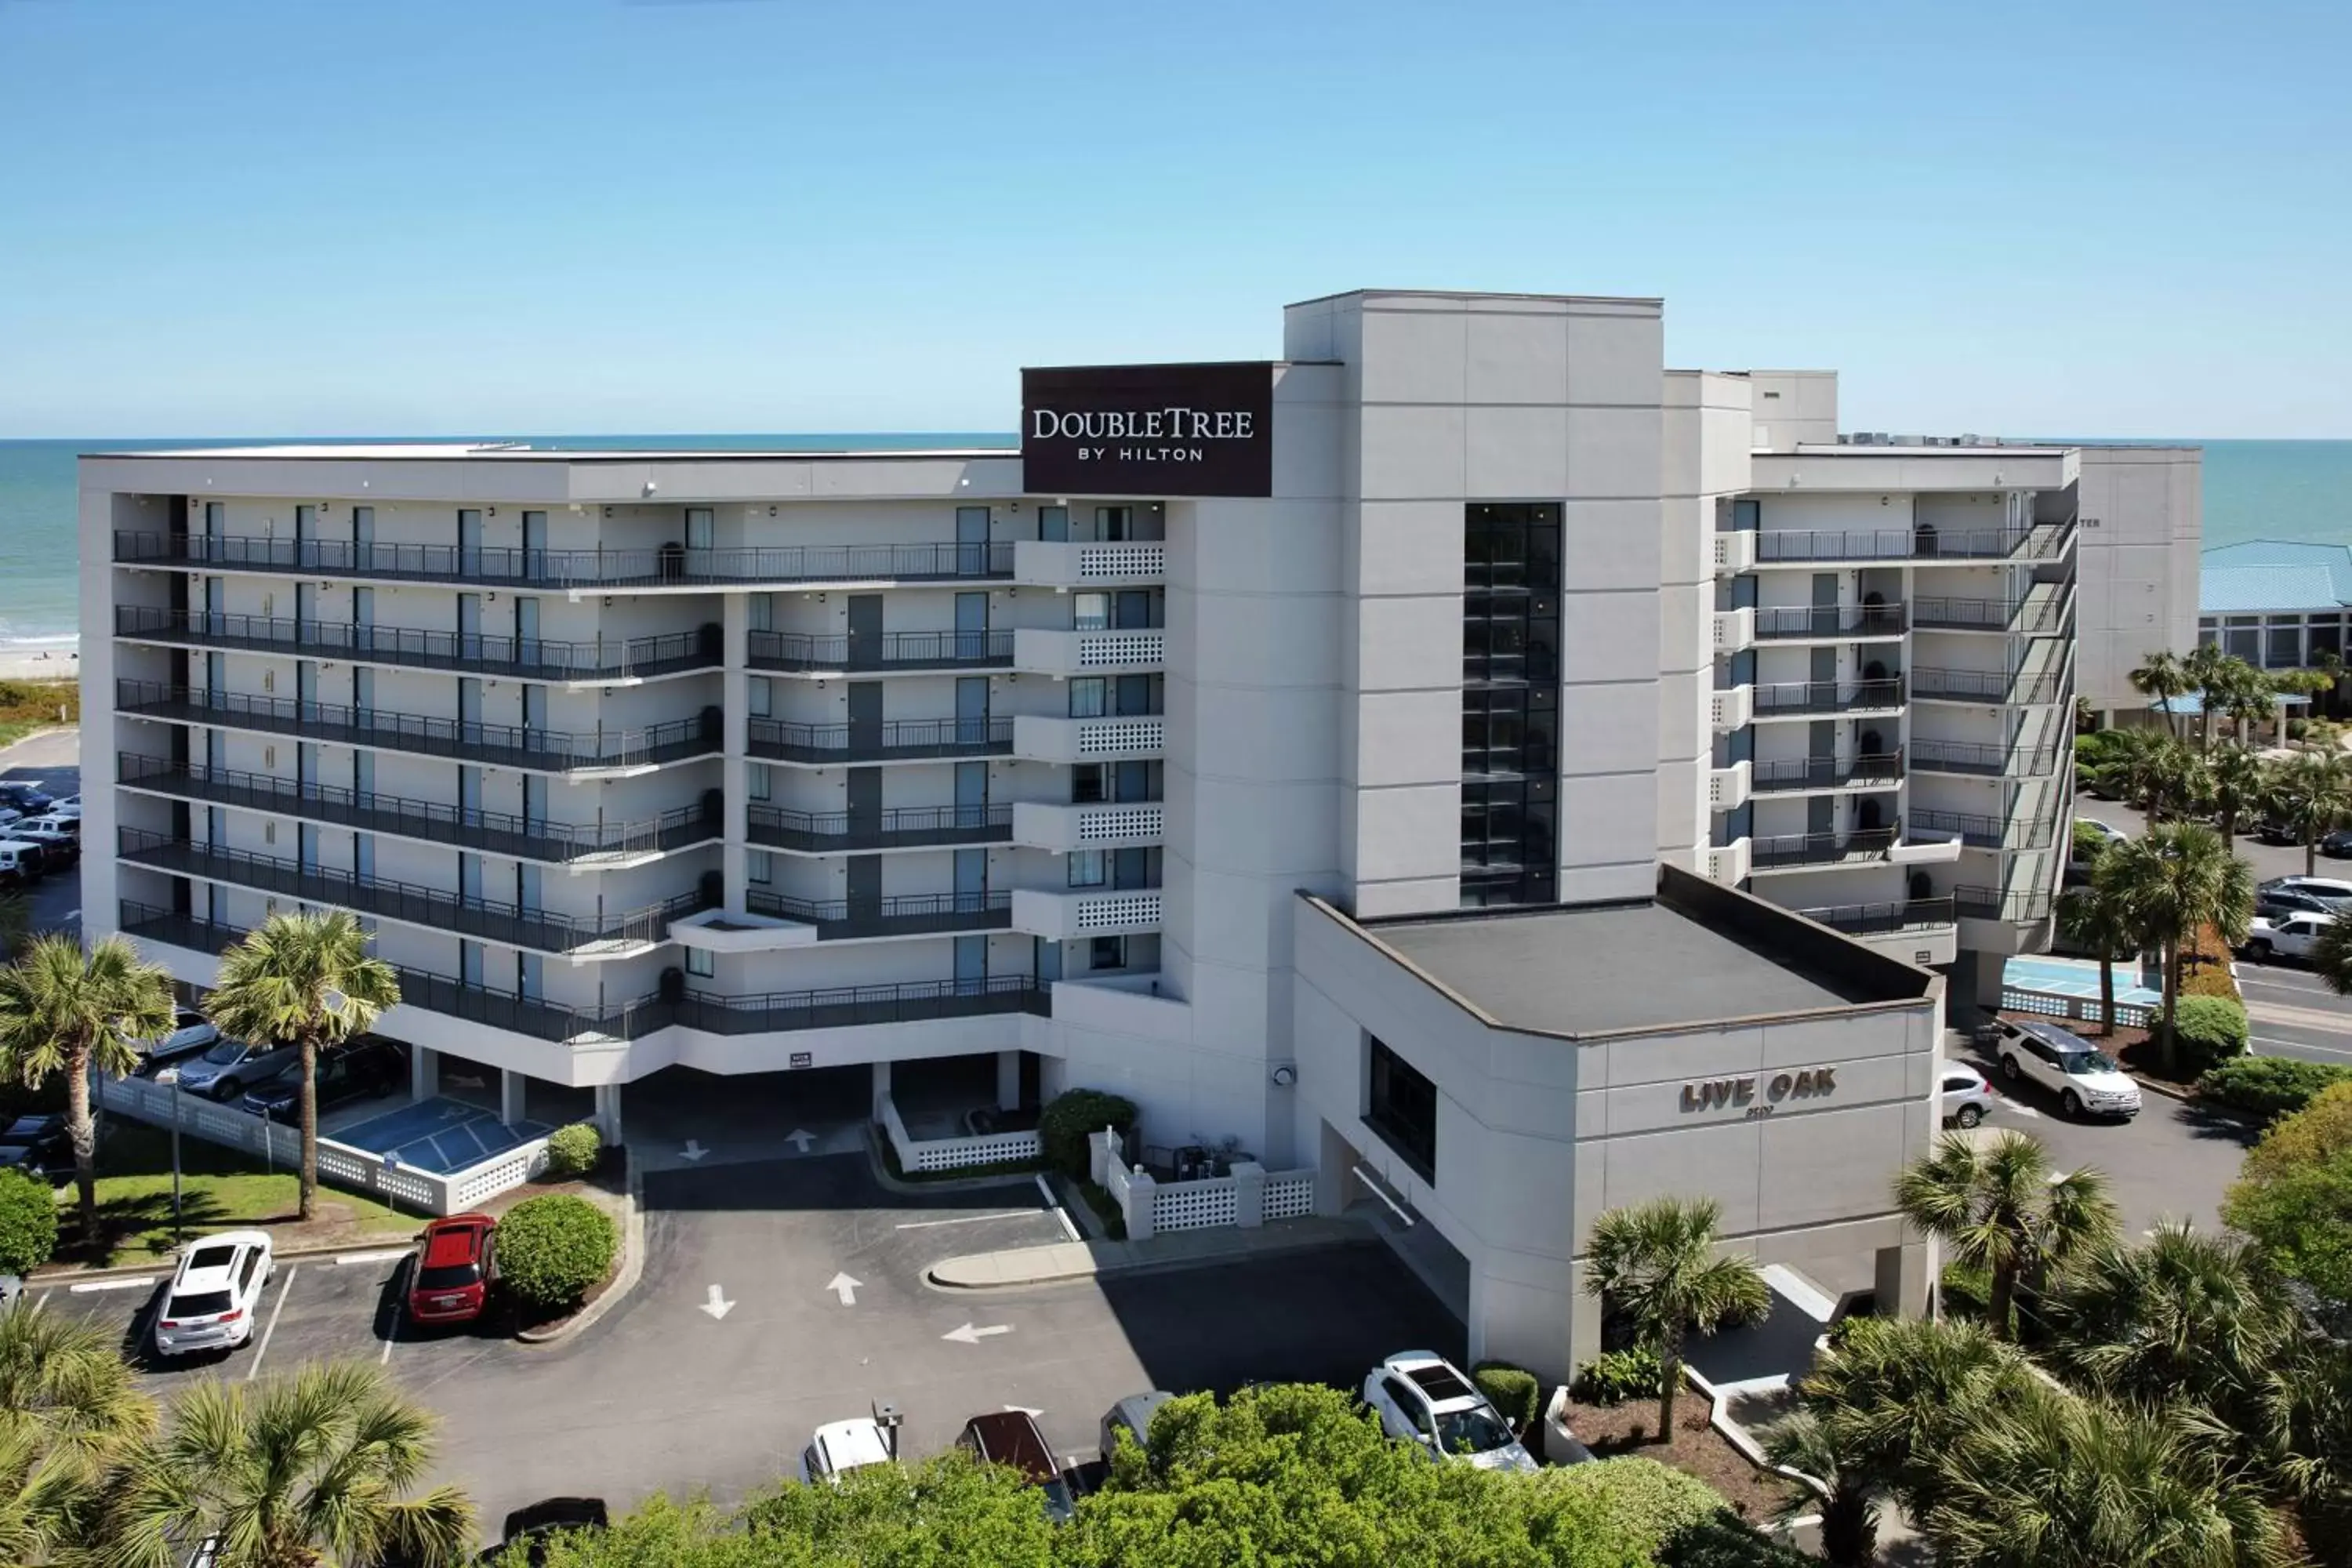 Property Building in DoubleTree Resort by Hilton Myrtle Beach Oceanfront